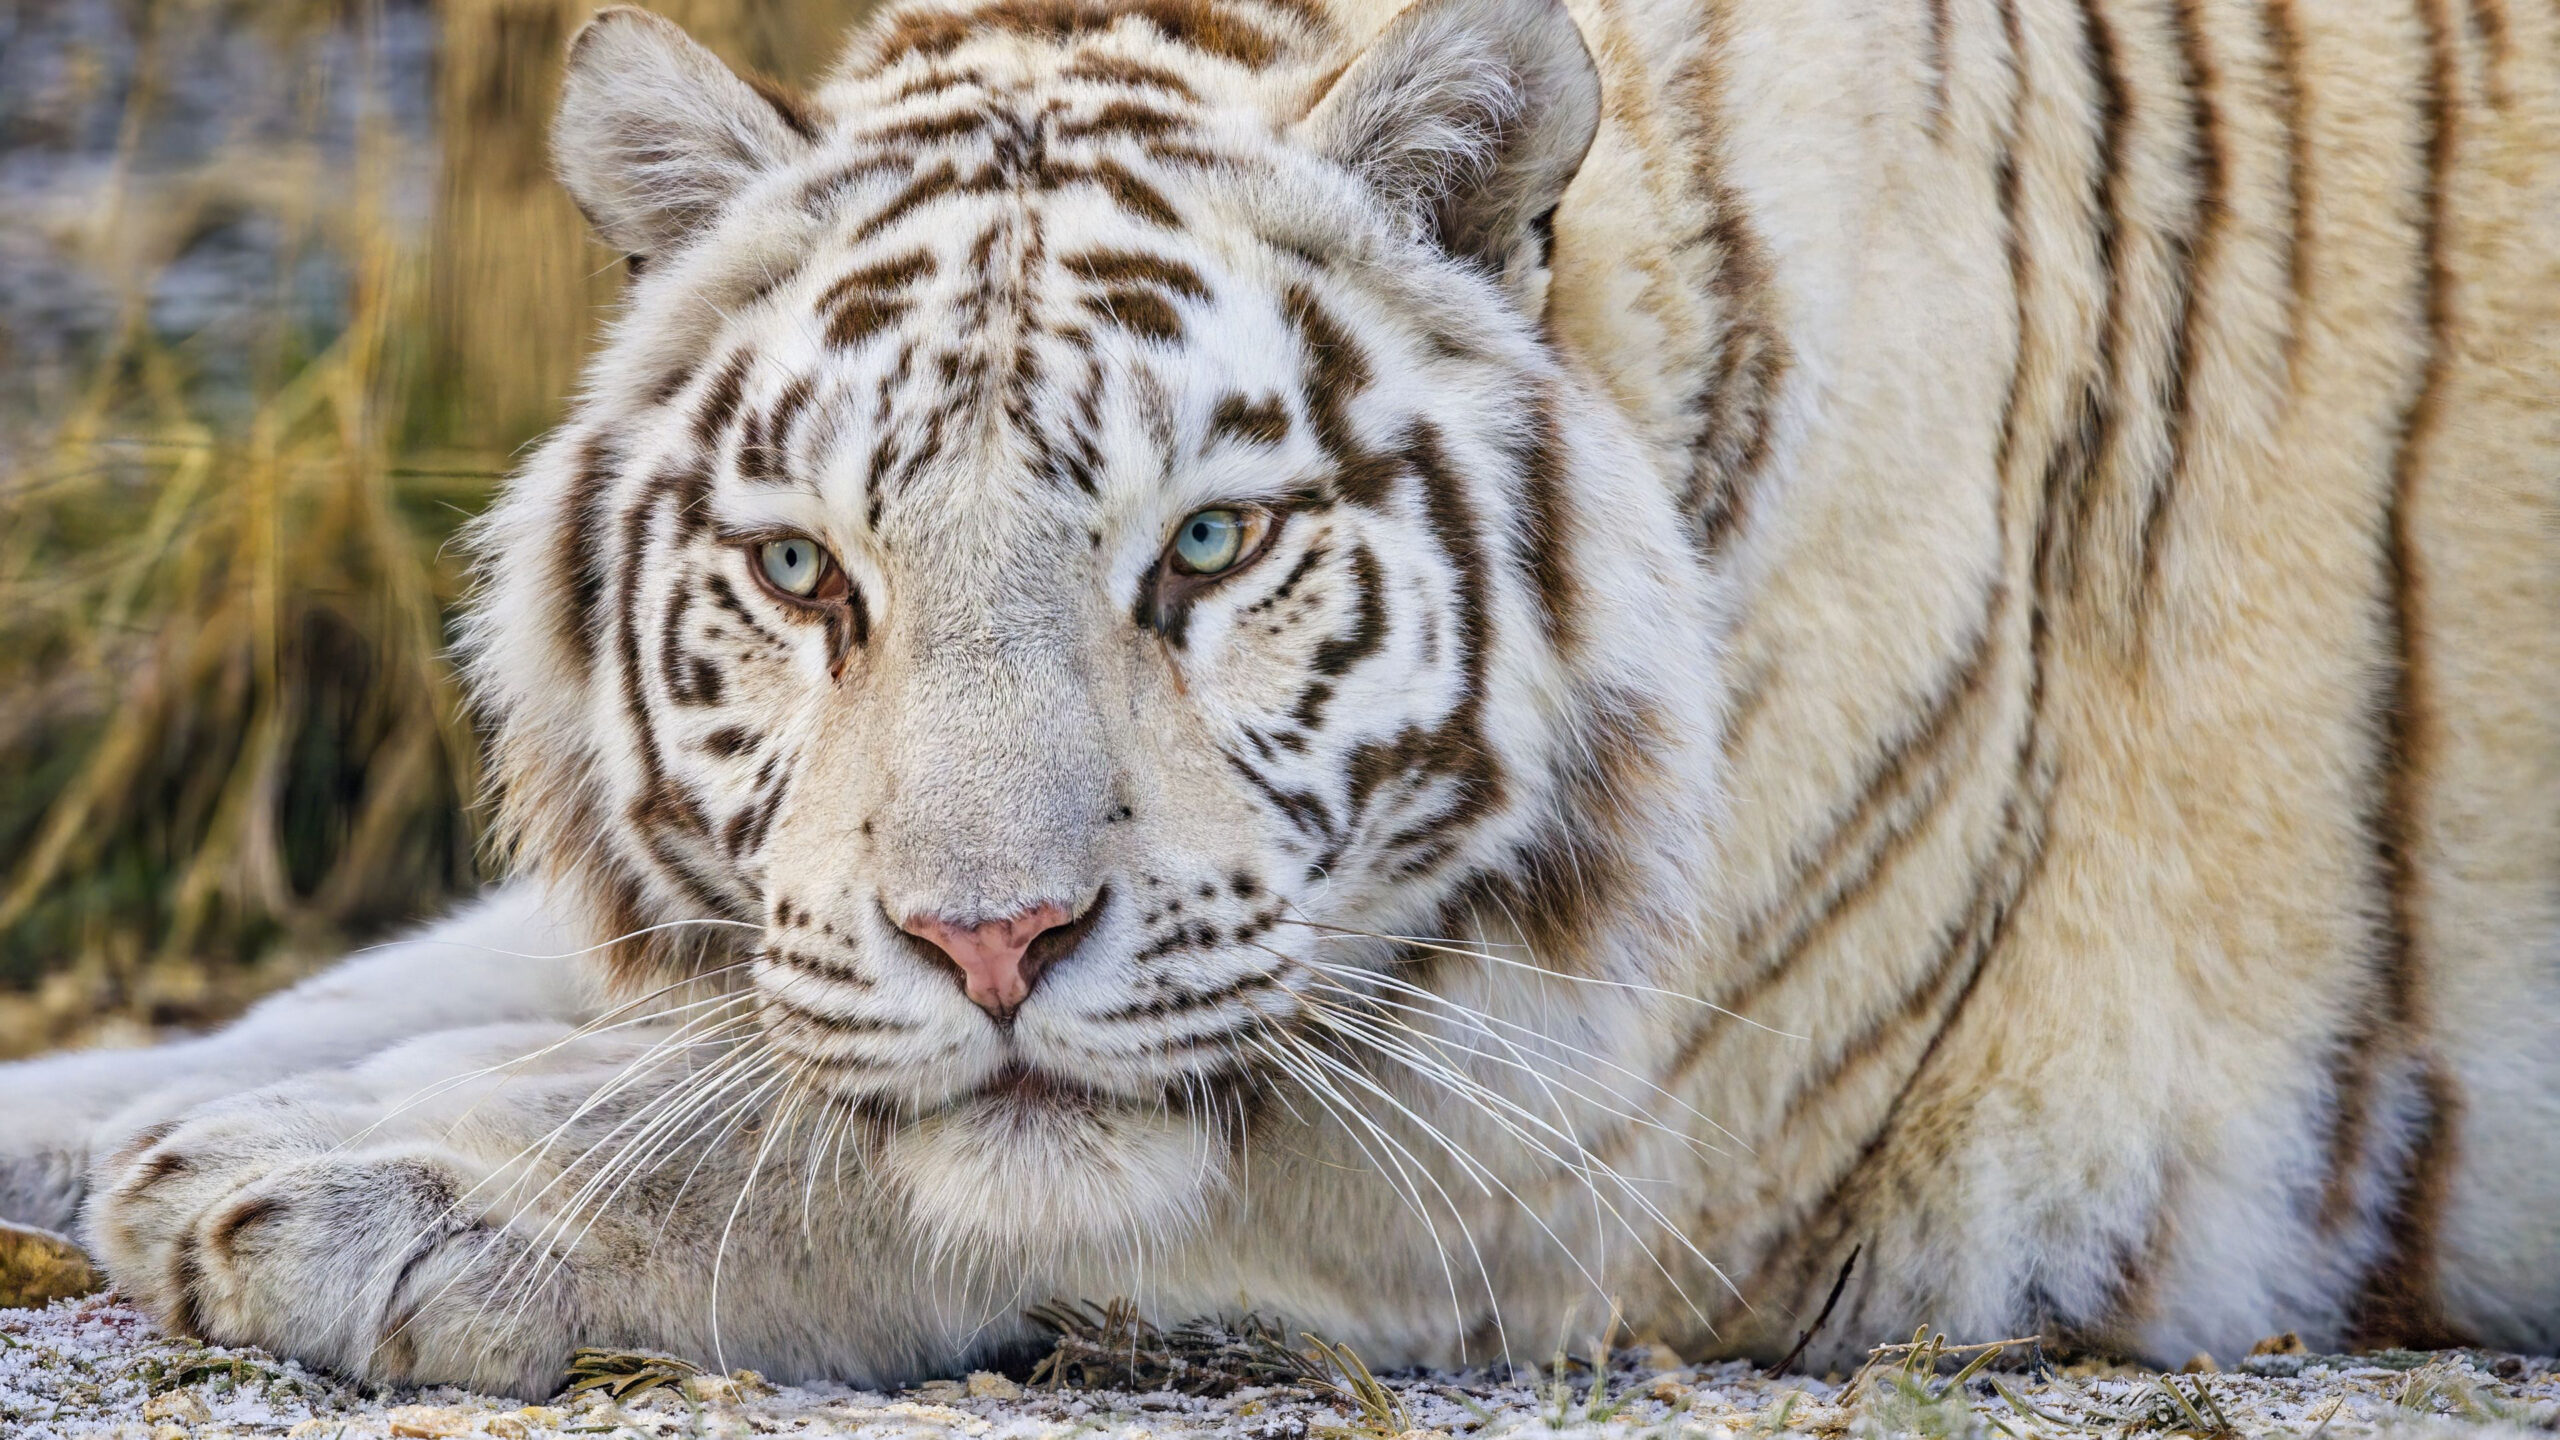 Closeup View Of White Tiger Is Lying Down On Ground In Blur Wallpaper K 2K Tiger